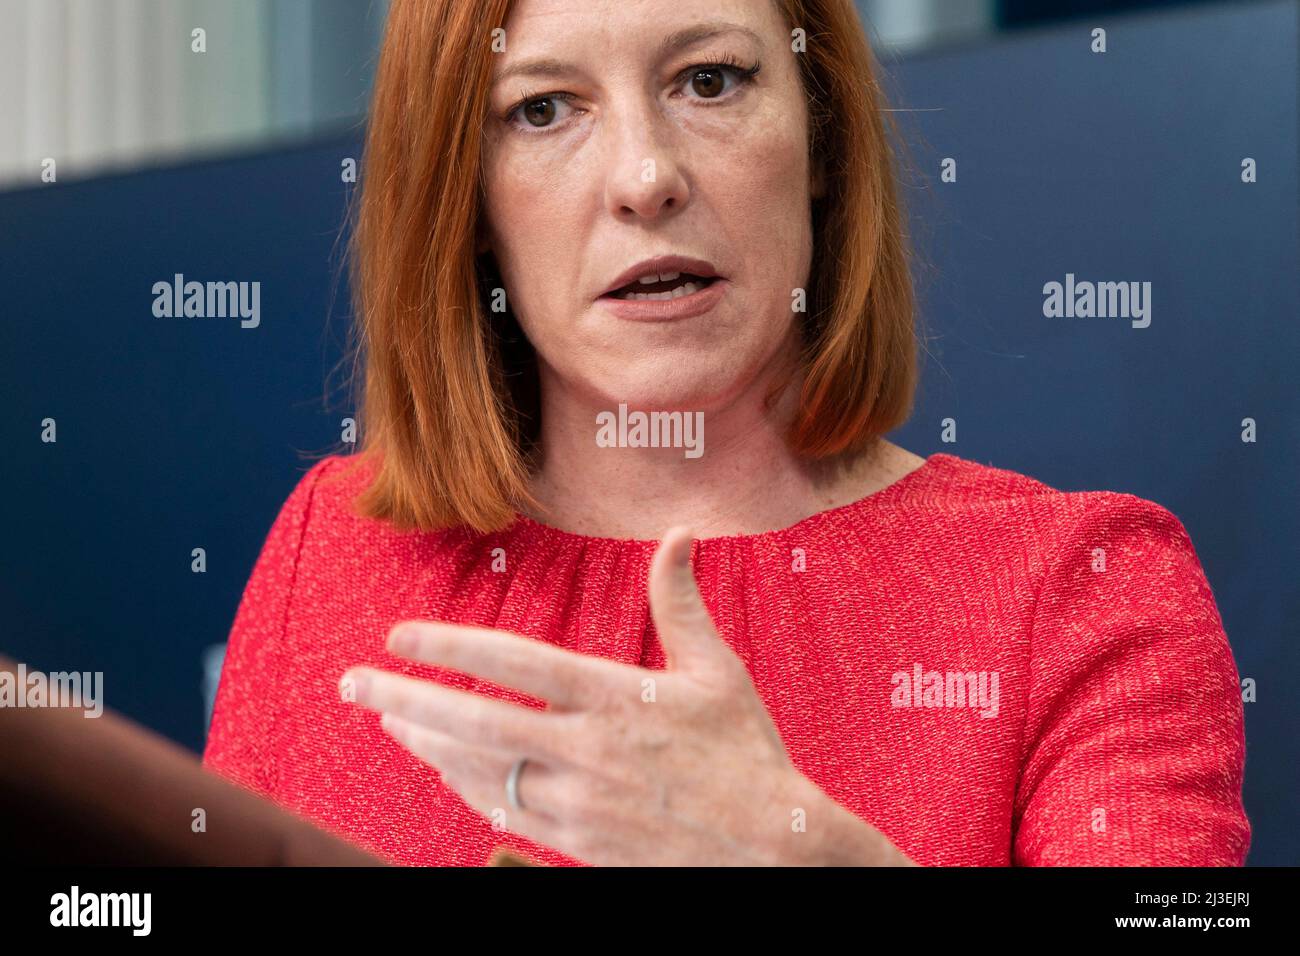 White House Press Secretary Jen Psaki speak to the media during a briefing at the White House in Washington, DC, USA on April 7, 2022. Psaki spoke about the confirmation Judge Nominee Kentanji Jackson Brown to the Supreme Court and possible exposure to coronavirus disease (COVID-19) by U.S. President Joe Biden Photo by Joshua Roberts/Pool/ABACAPRESS.COM Stock Photo